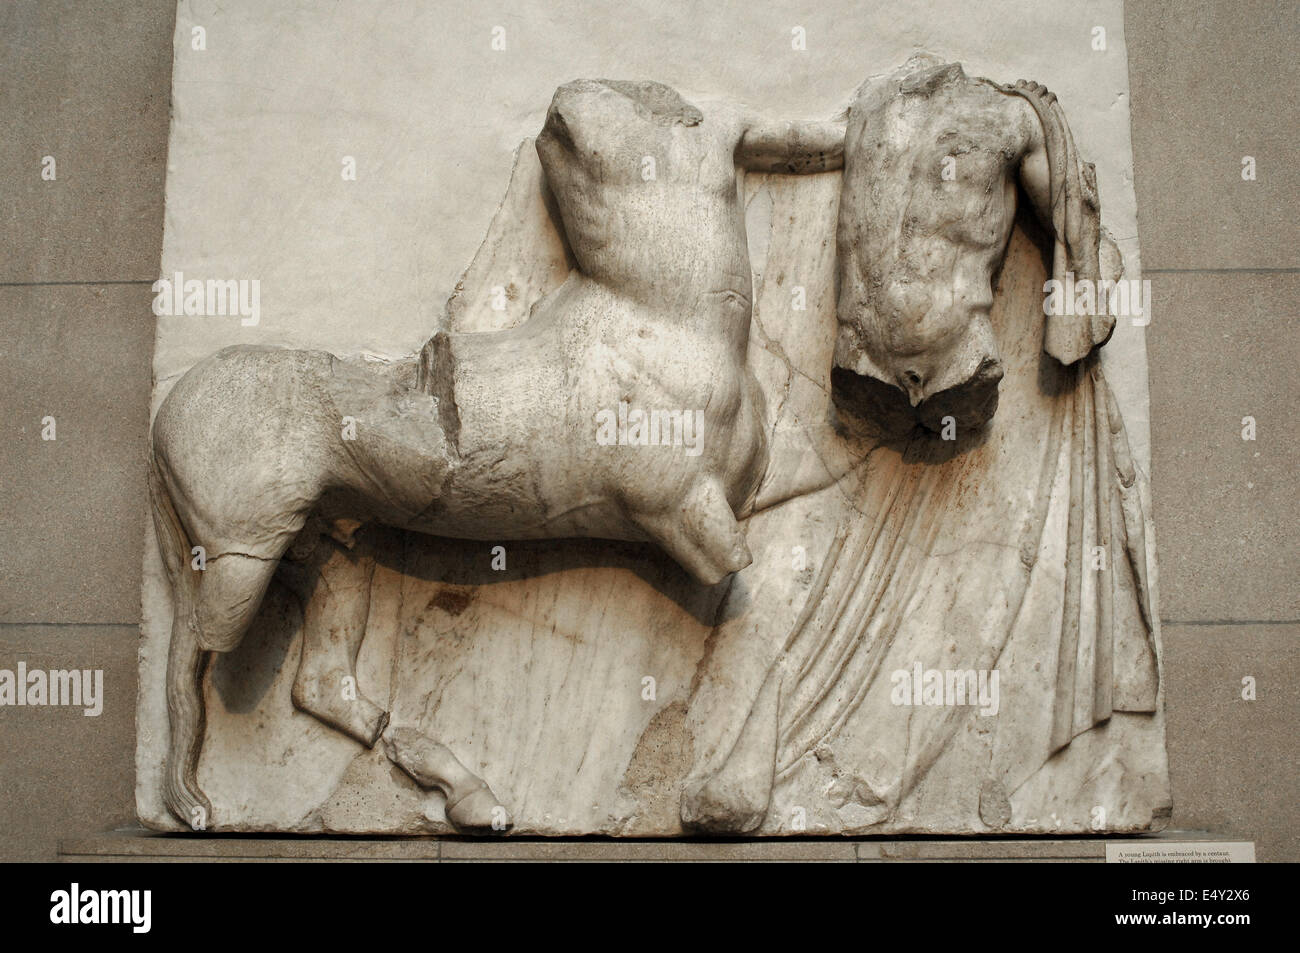 Metope VI from the Parthenon marbles depicting part of the battle between the Centaurs and the Lapiths. 5th century BC. Athens. Stock Photo